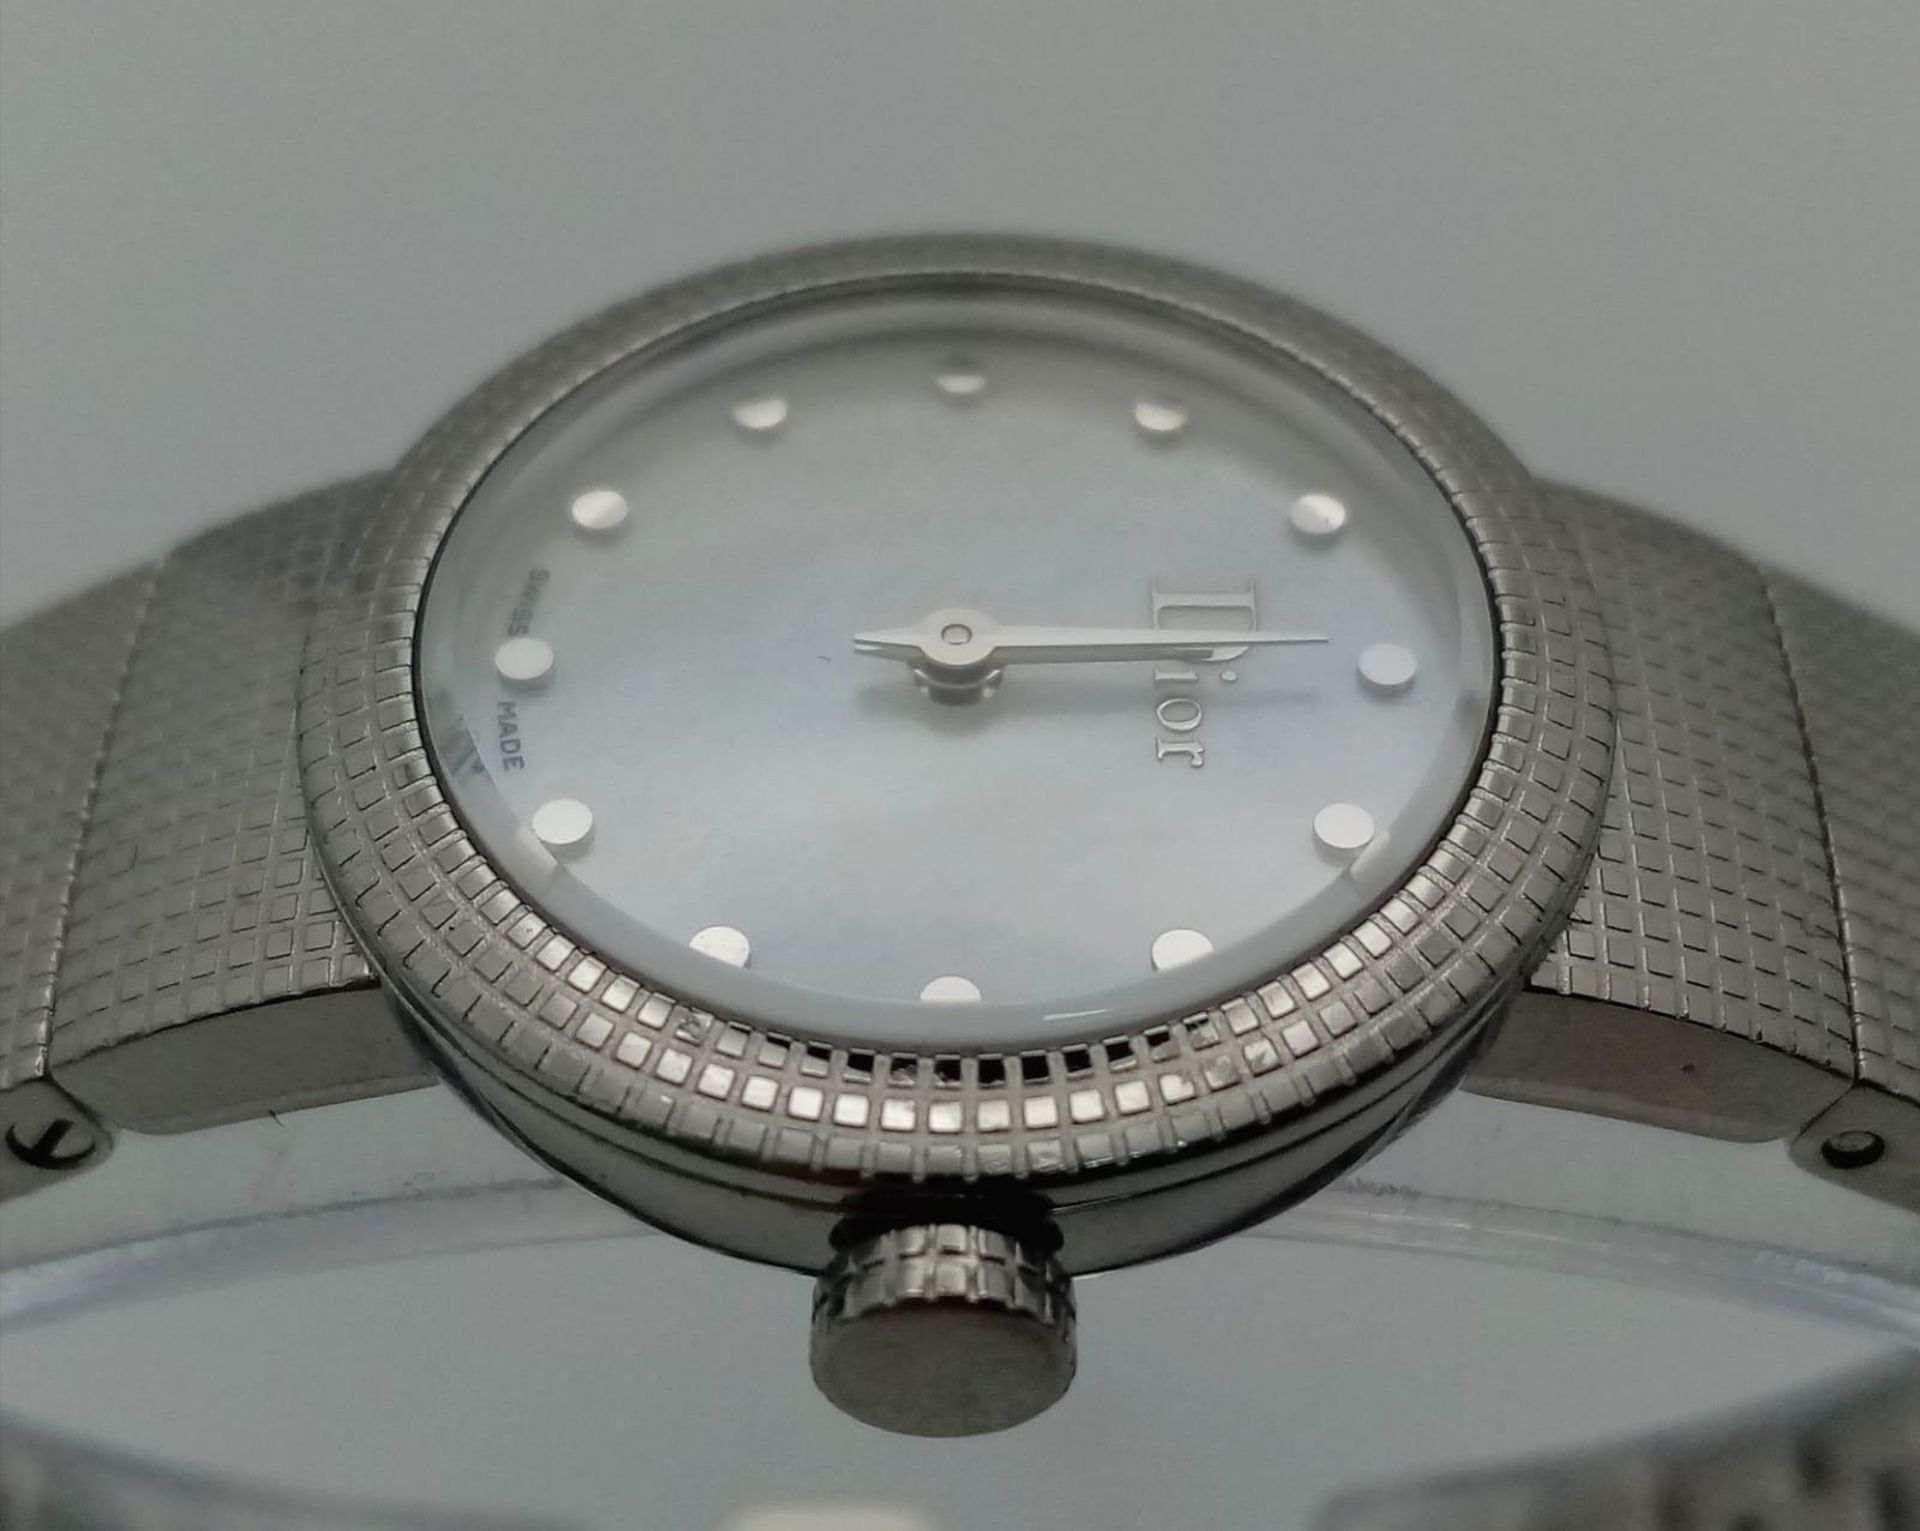 A Designer Christian Dior Quartz Ladies Watch. Stainless steel bracelet and case - 23mm. White dial. - Image 6 of 10